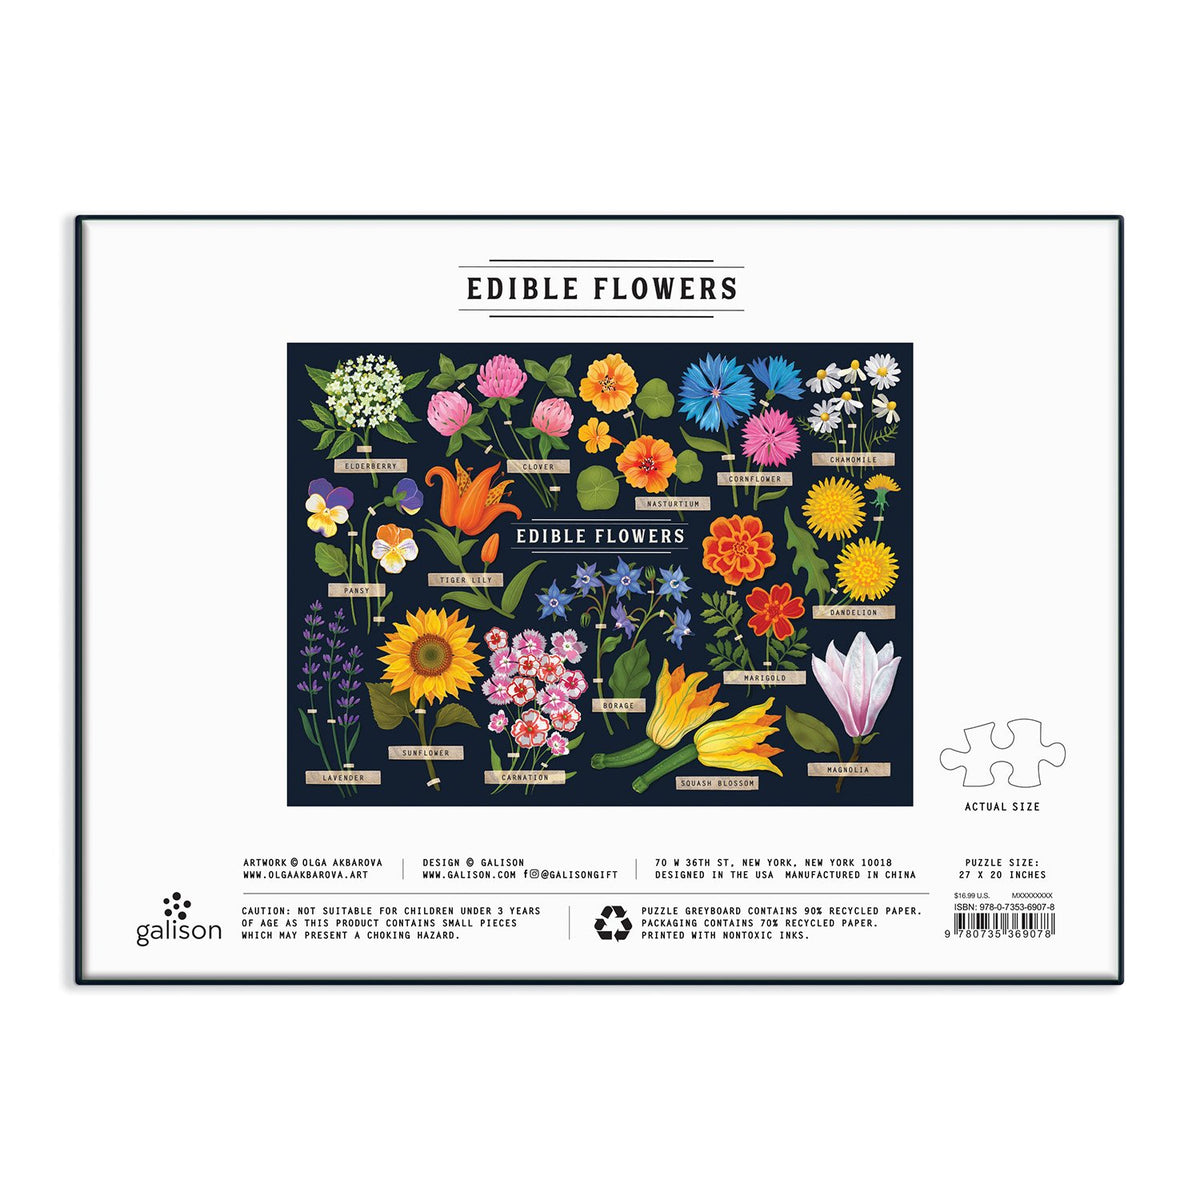 Visual appearance of the five edible flowers